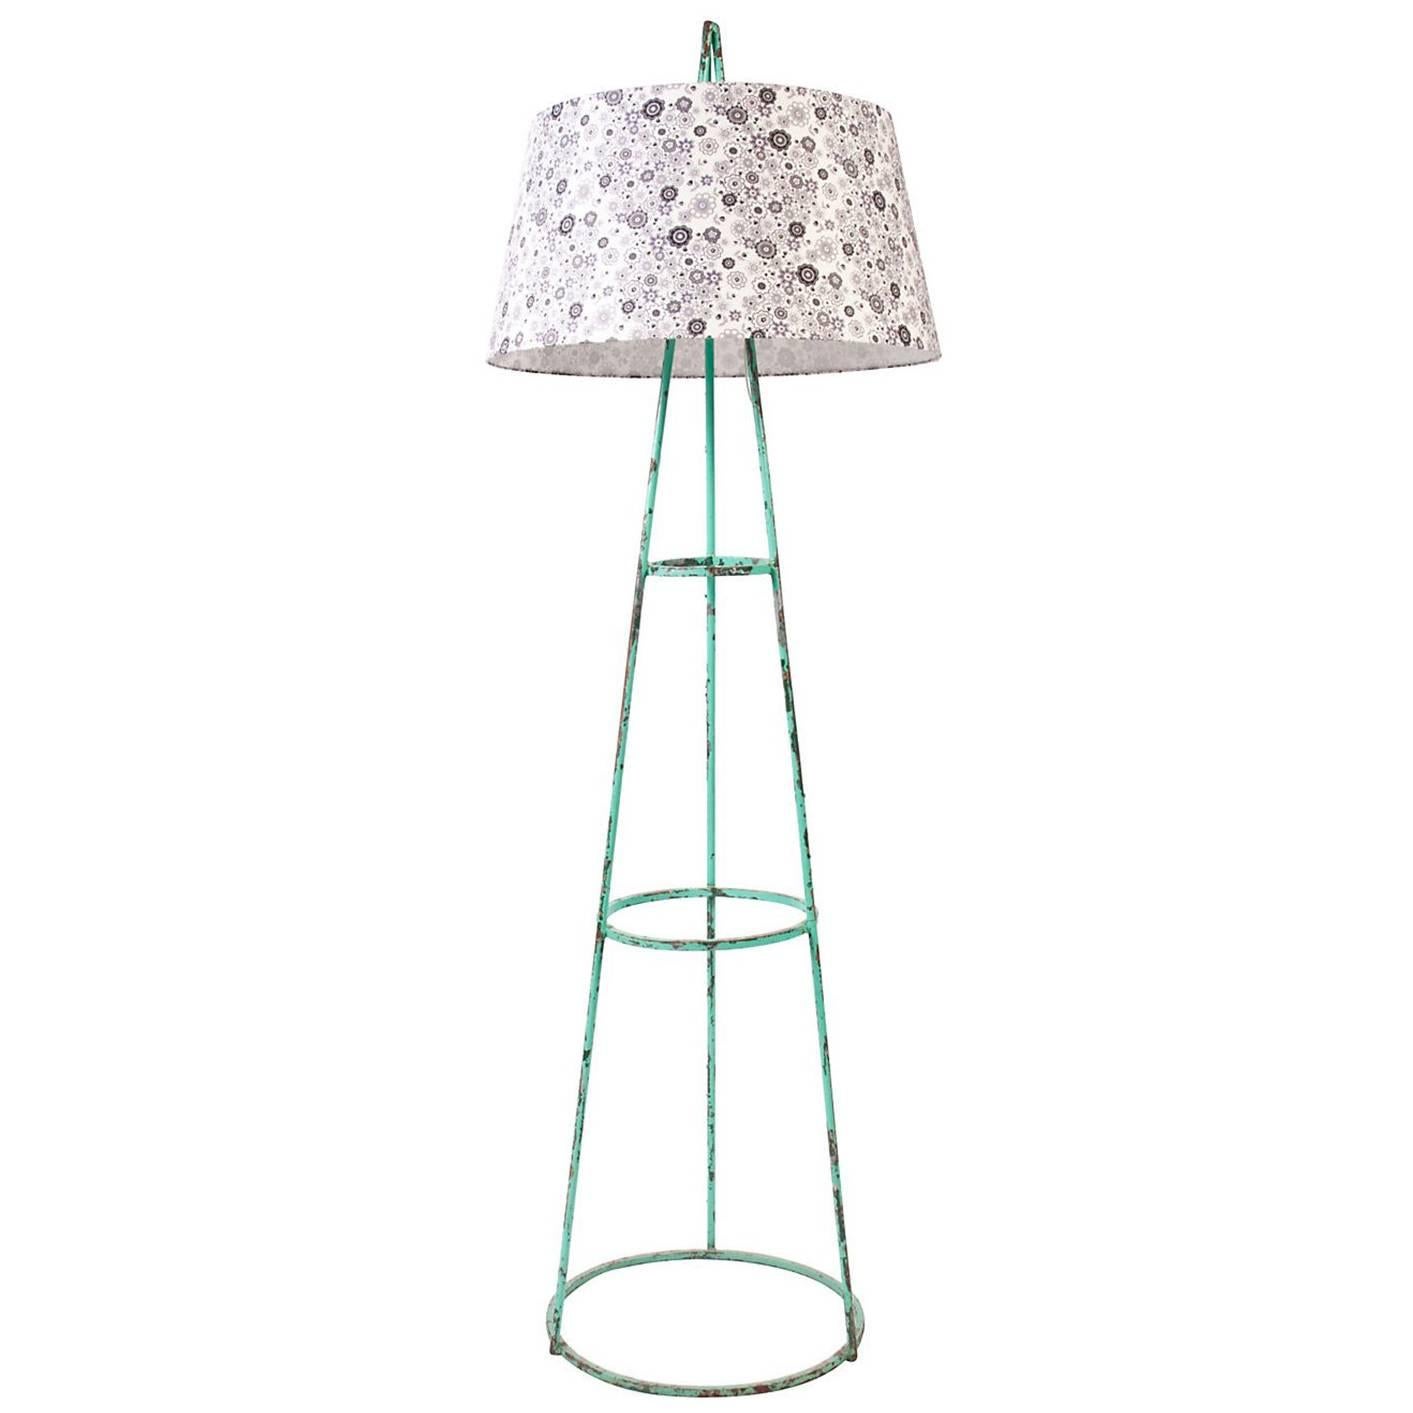 Floor Tripod Lamp with Liberty of London Shade For Sale